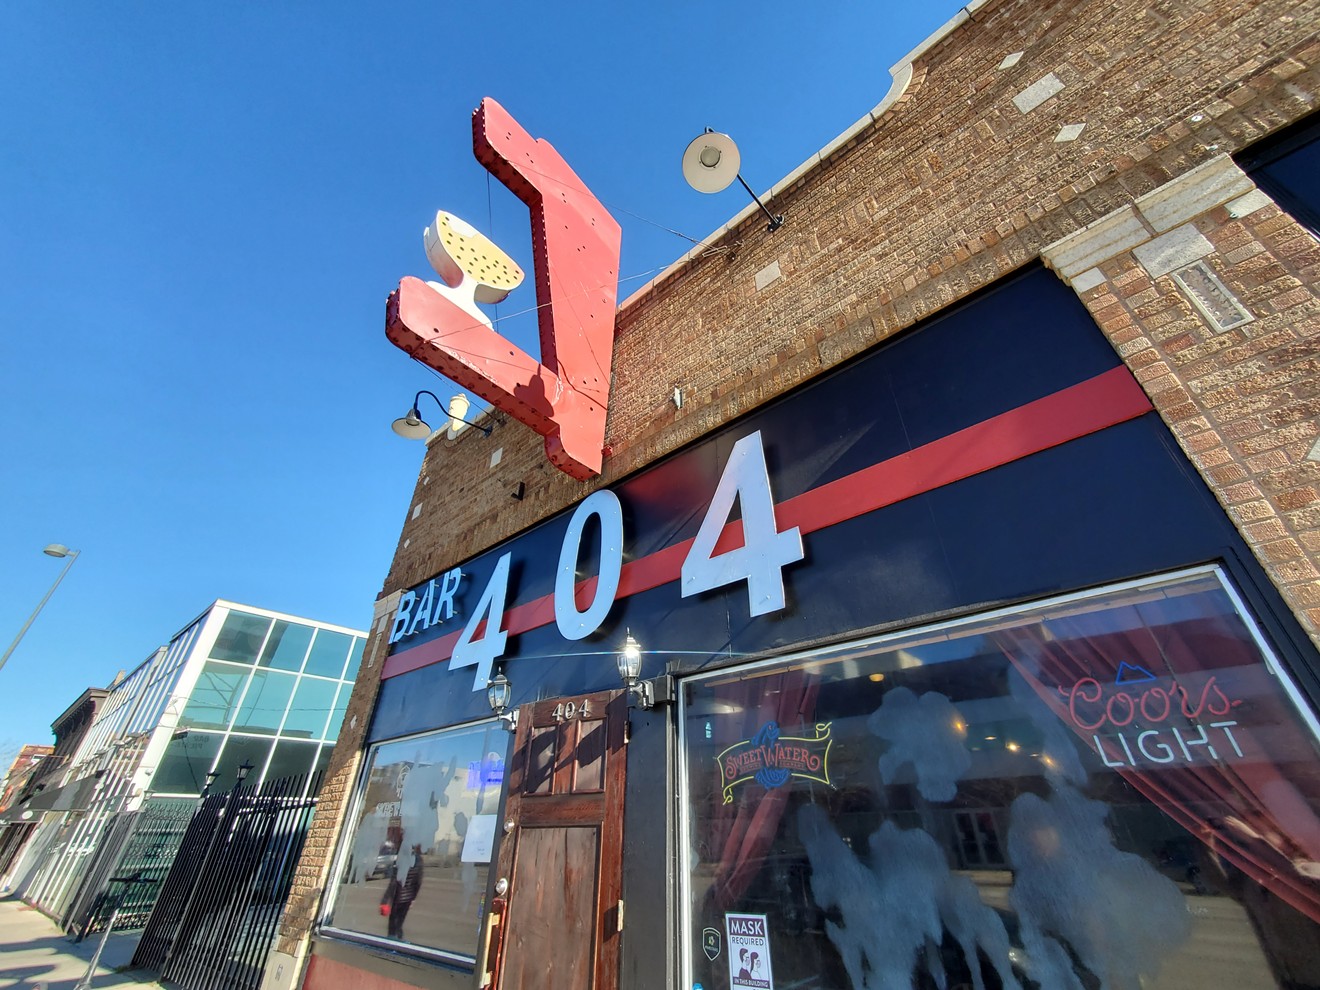 The longtime home of Club 404 is now Bar 404 — though the sign still needs to be painted.